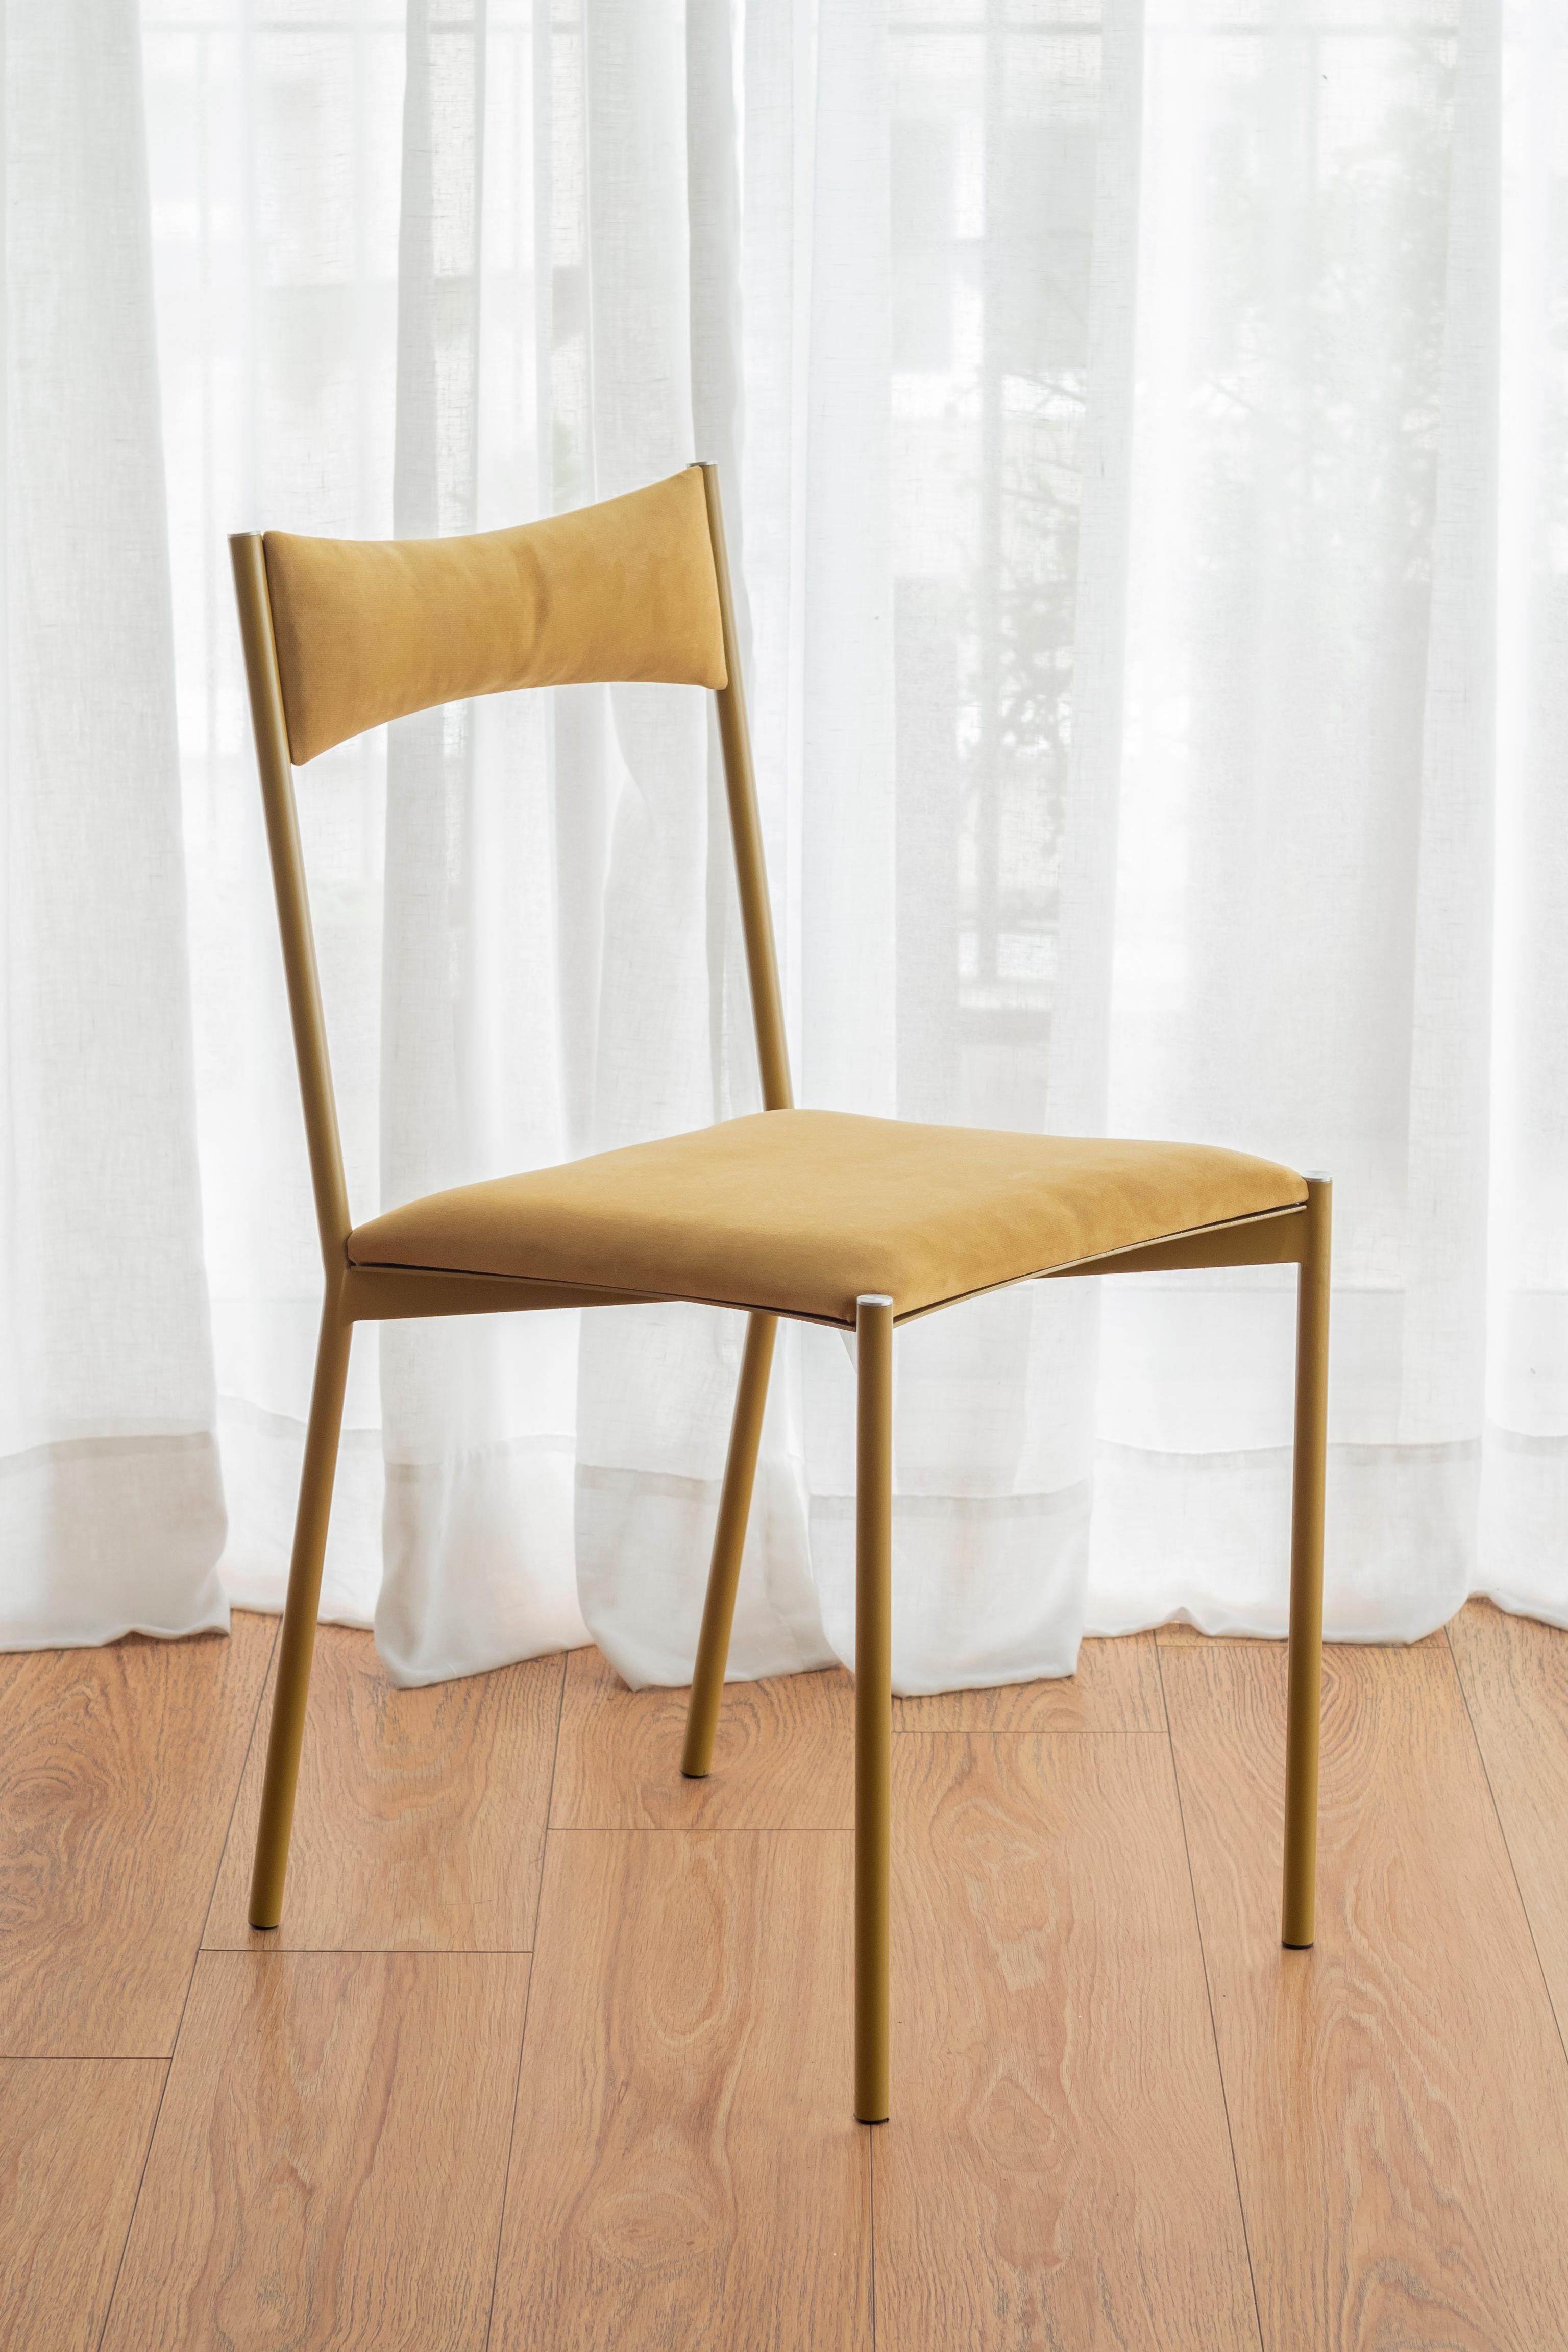 Argentine Set of 2 Tensa Chairs, Yellow by Ries